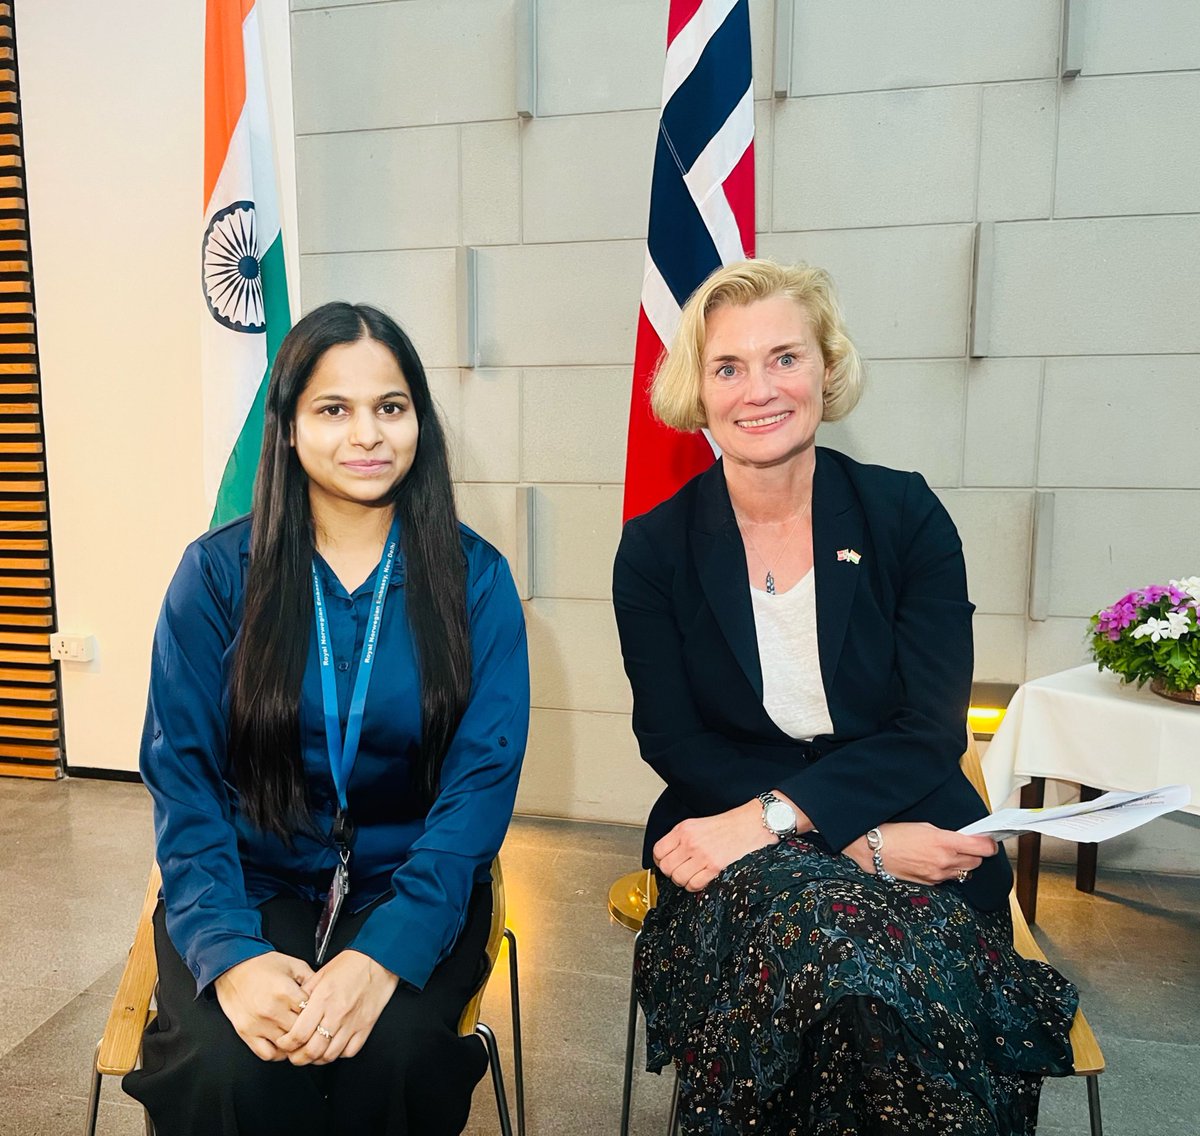 Spoke with @MayElinStener, as she begins her duties as Norway’s Ambassador to India. She presented her credentials to the @rashtrapatibhvn yesterday. 

@ANI @ani_digital